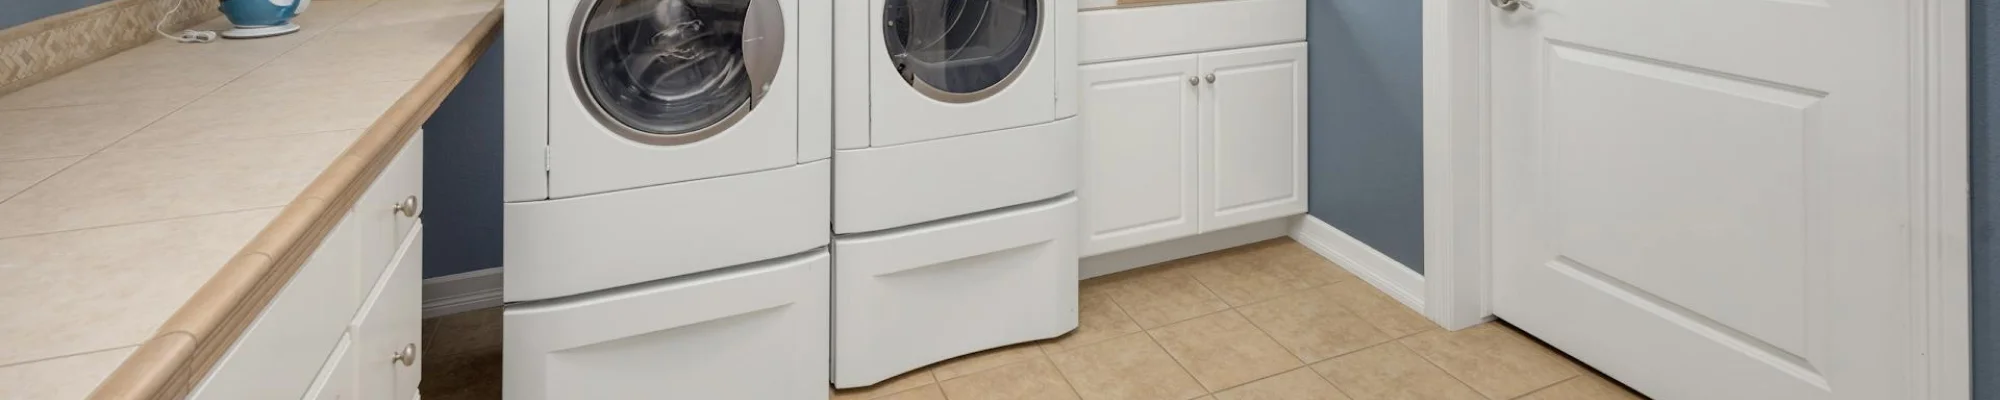 You expect outstanding laundry room flooring and designs for your home; that is precisely what you get with King's Floor Covering. No surprises, whatsoever.